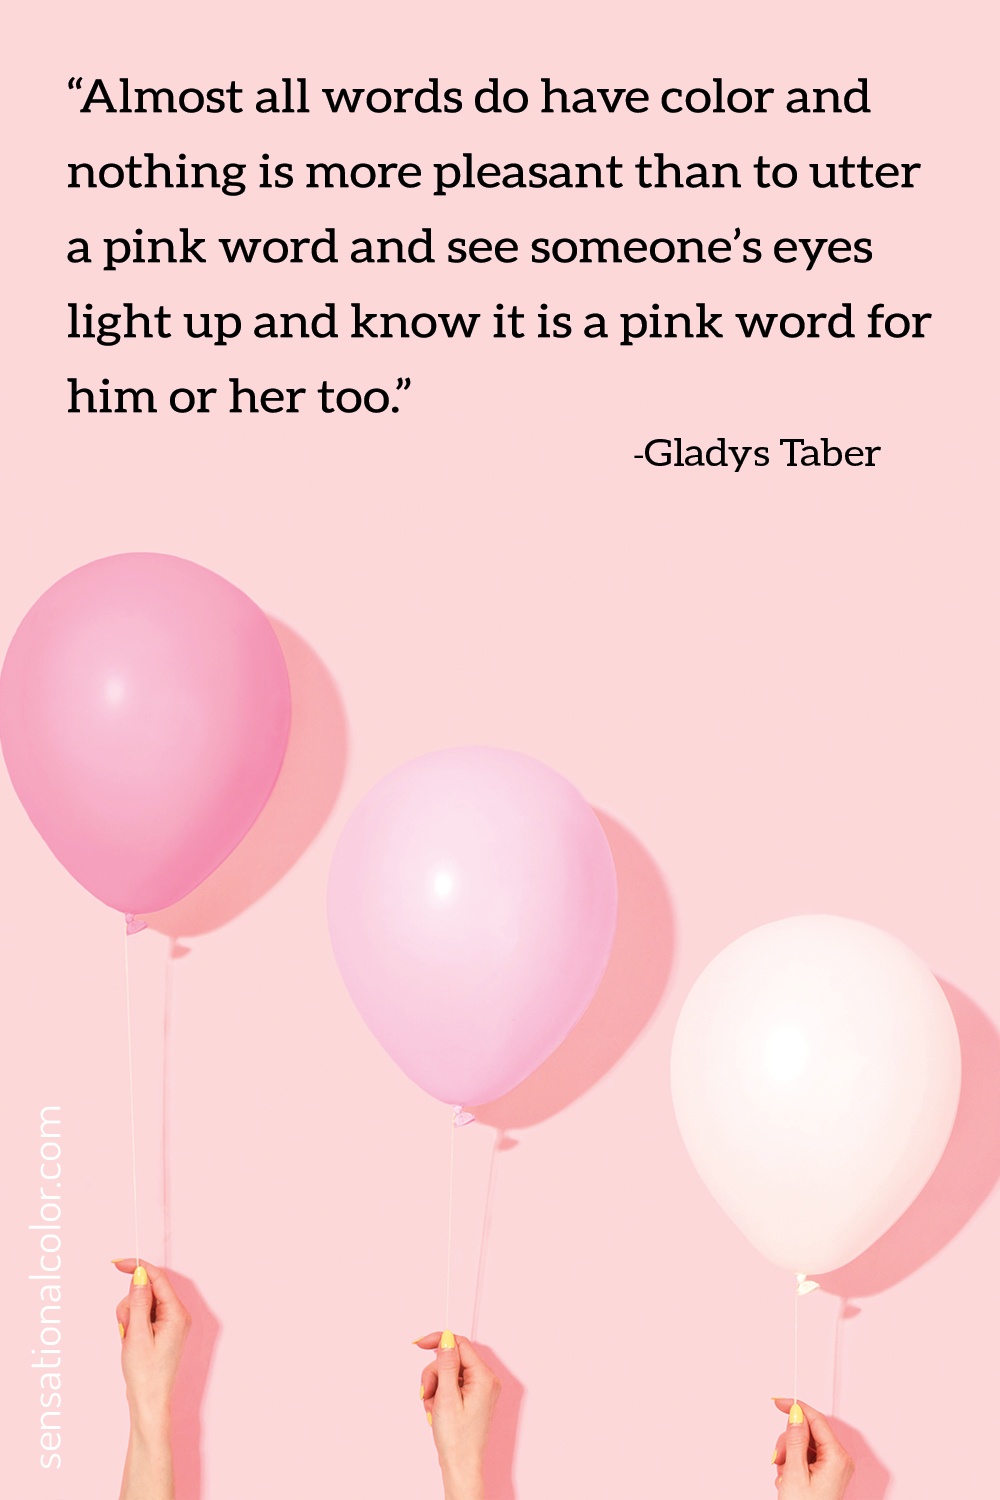 “Almost all words do have color and nothing is more pleasant than to utter a pink word and see someone’s eyes light up and know it is a pink word for him or her too.” - Gladys Taber